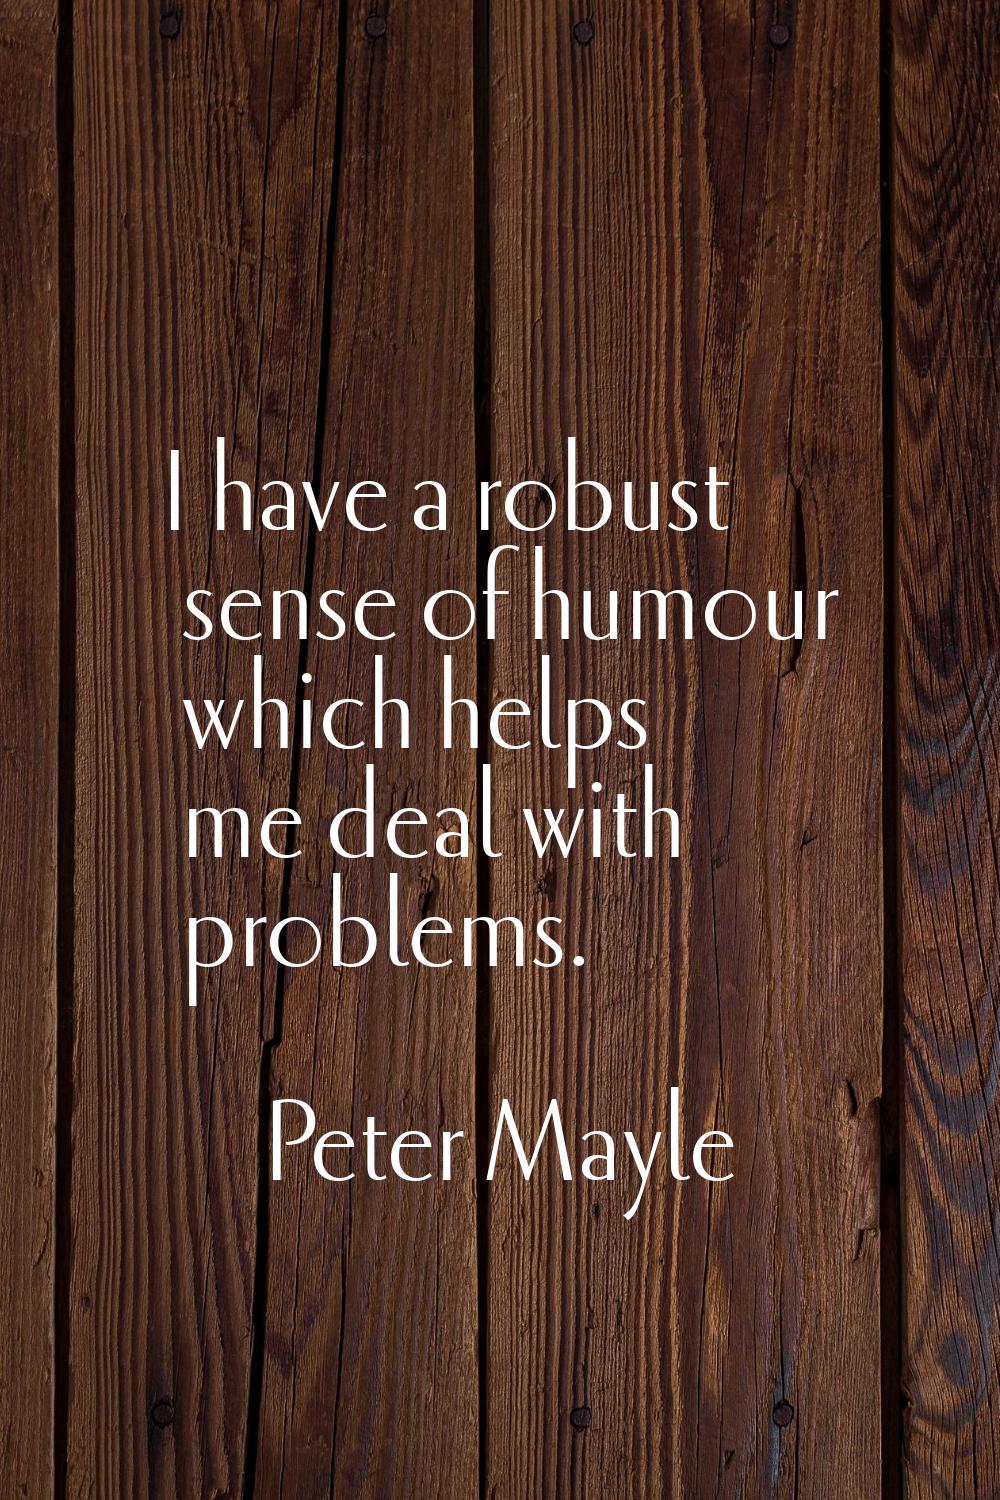 I have a robust sense of humour which helps me deal with problems.